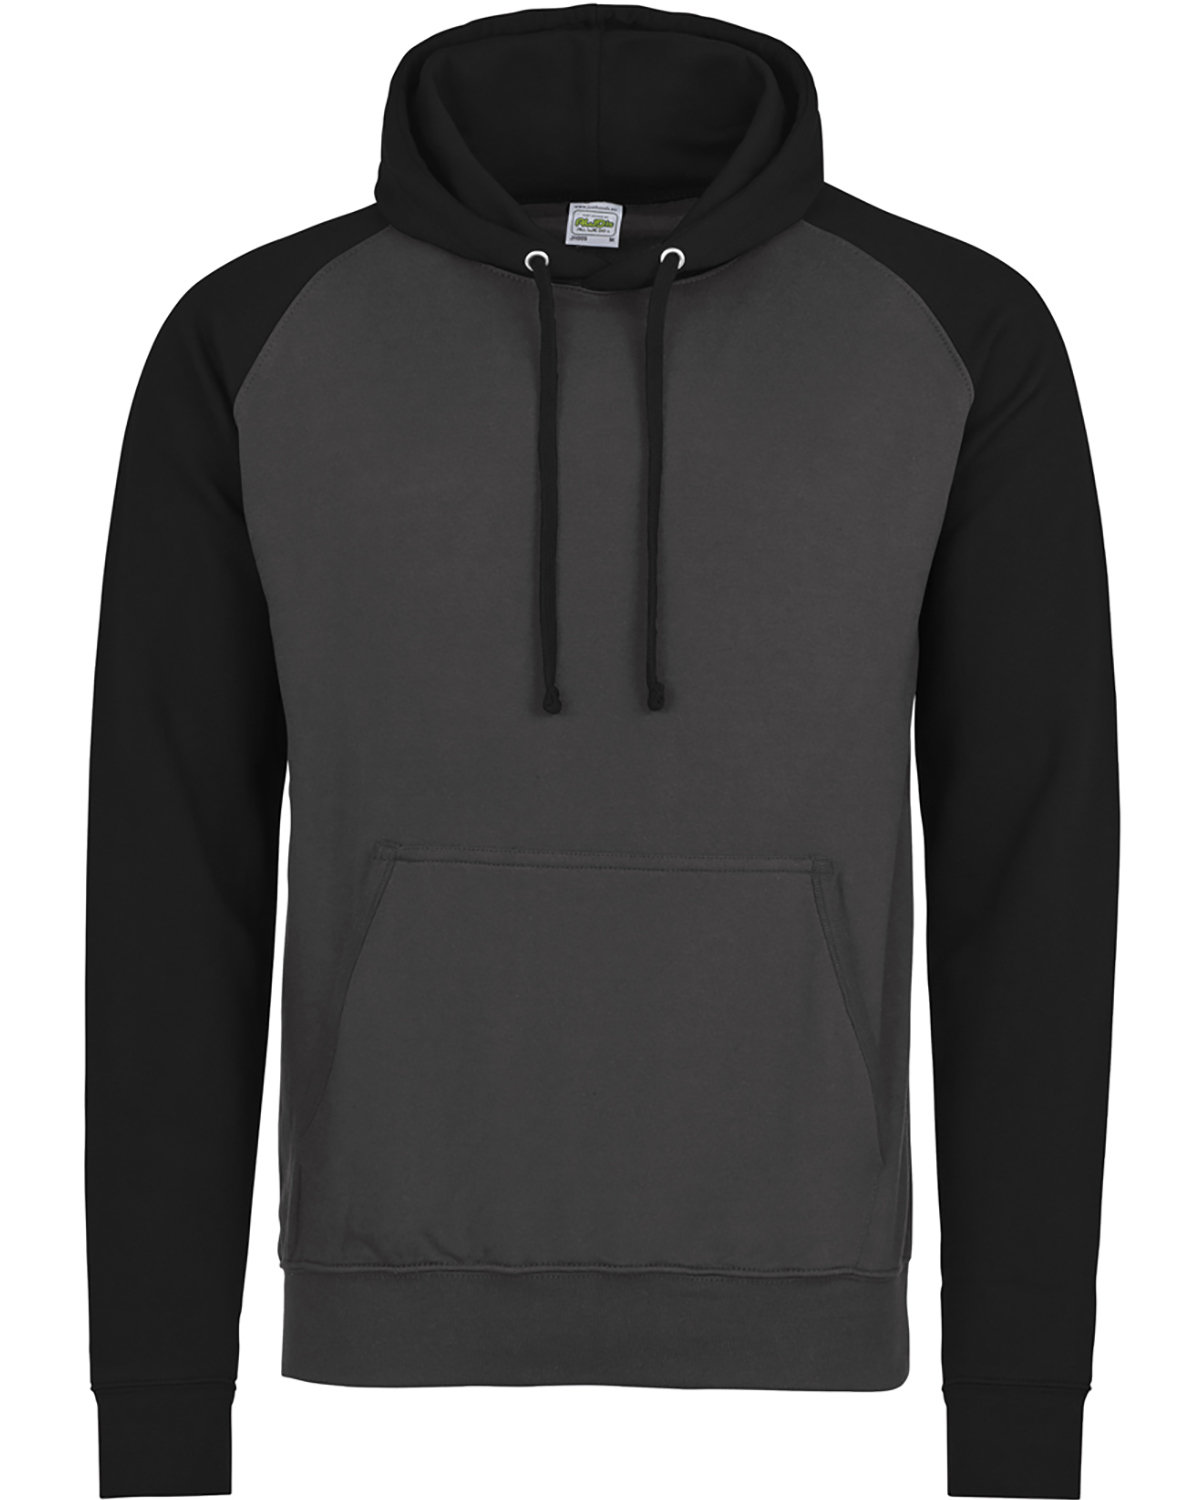 Just Hoods By AWDis Adult 80/20 Midweight Contrast Baseball Hooded Sweatshirt CHARCOL/ JET BLK 